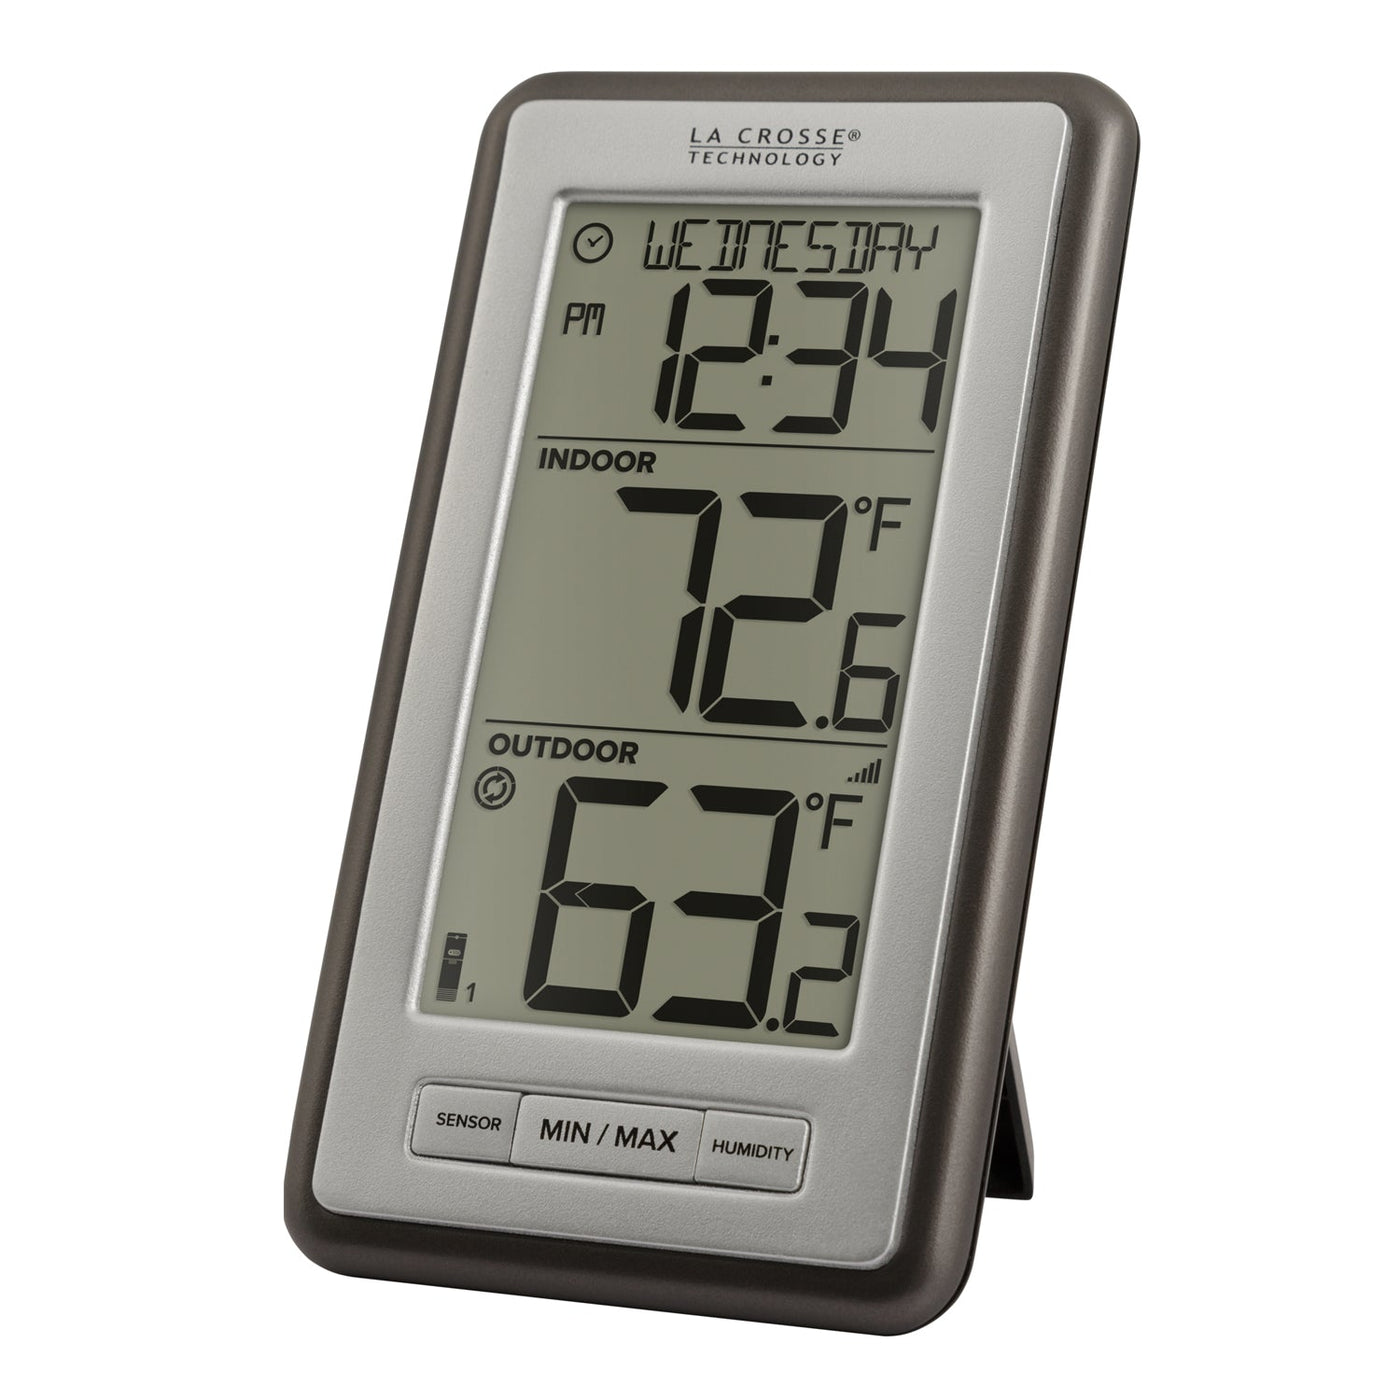 La Crosse Technology 308-147 Wireless Compact Digital Thermometer with Humidity, Black